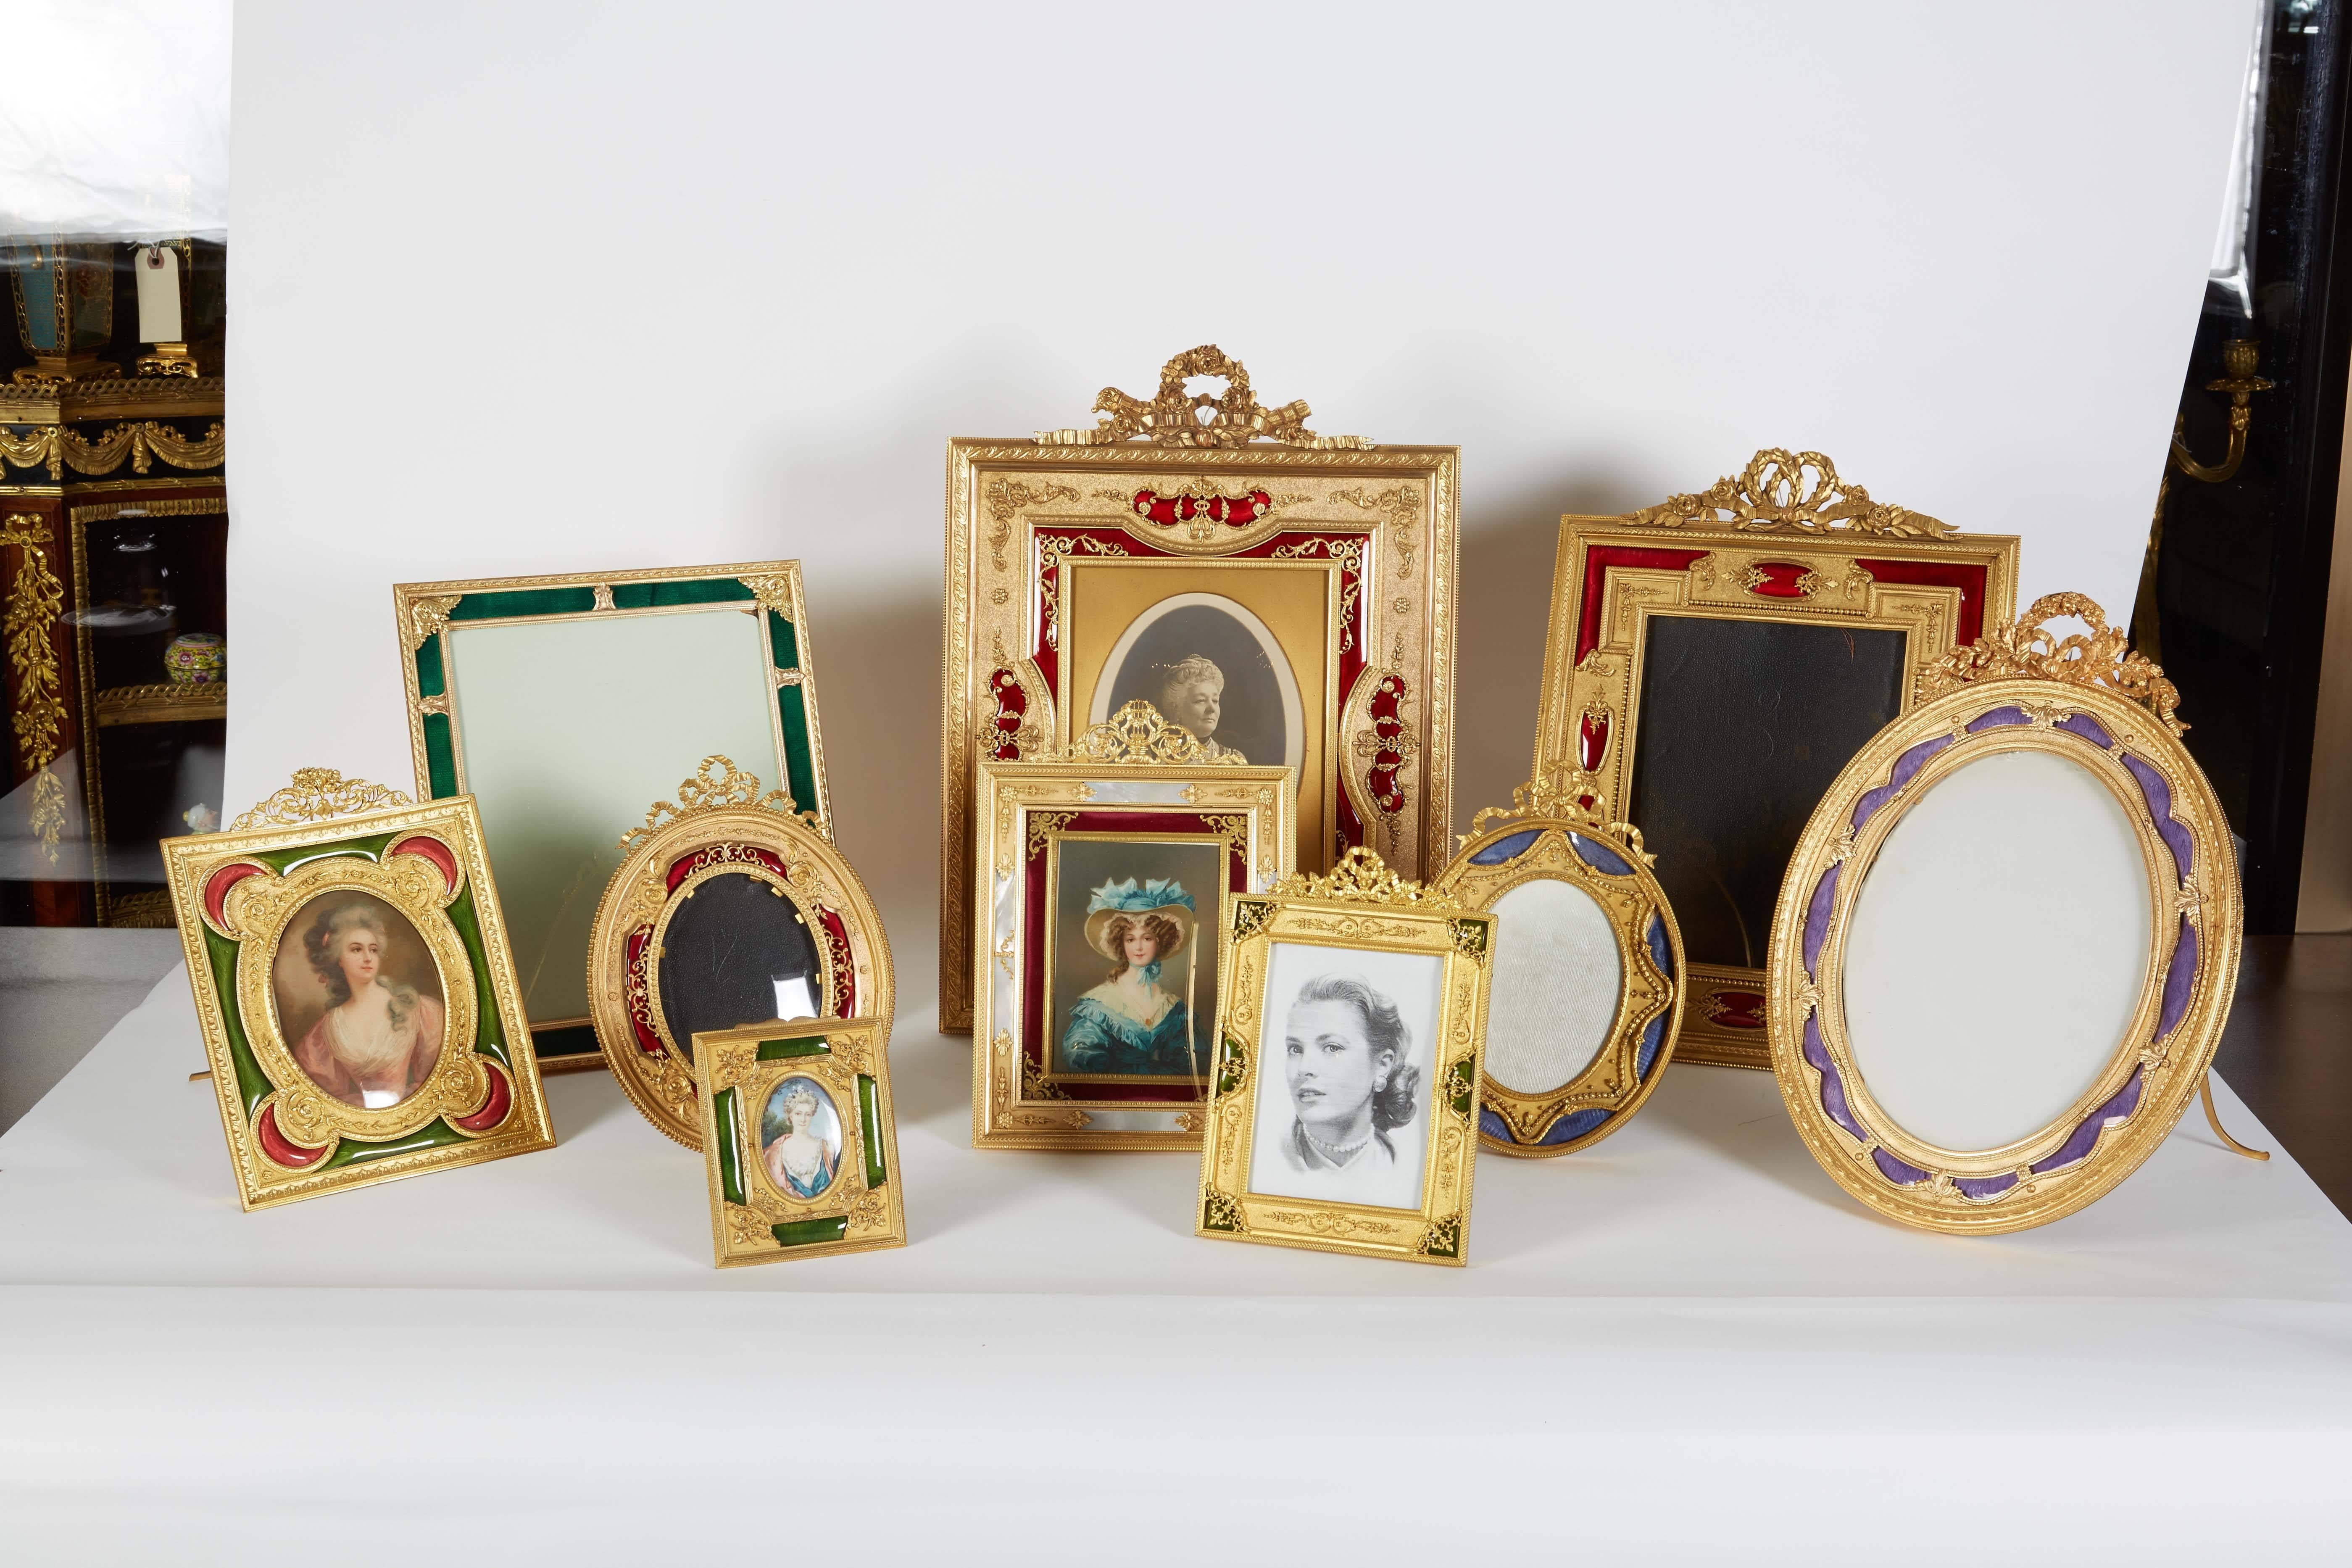 A French gilt bronze ormolu and green guilloche enamel picture photo frame, 19th century.

Measures: Frame size: 5 x 4.5 inches.
Photo size: 2.5 x 2 inches.